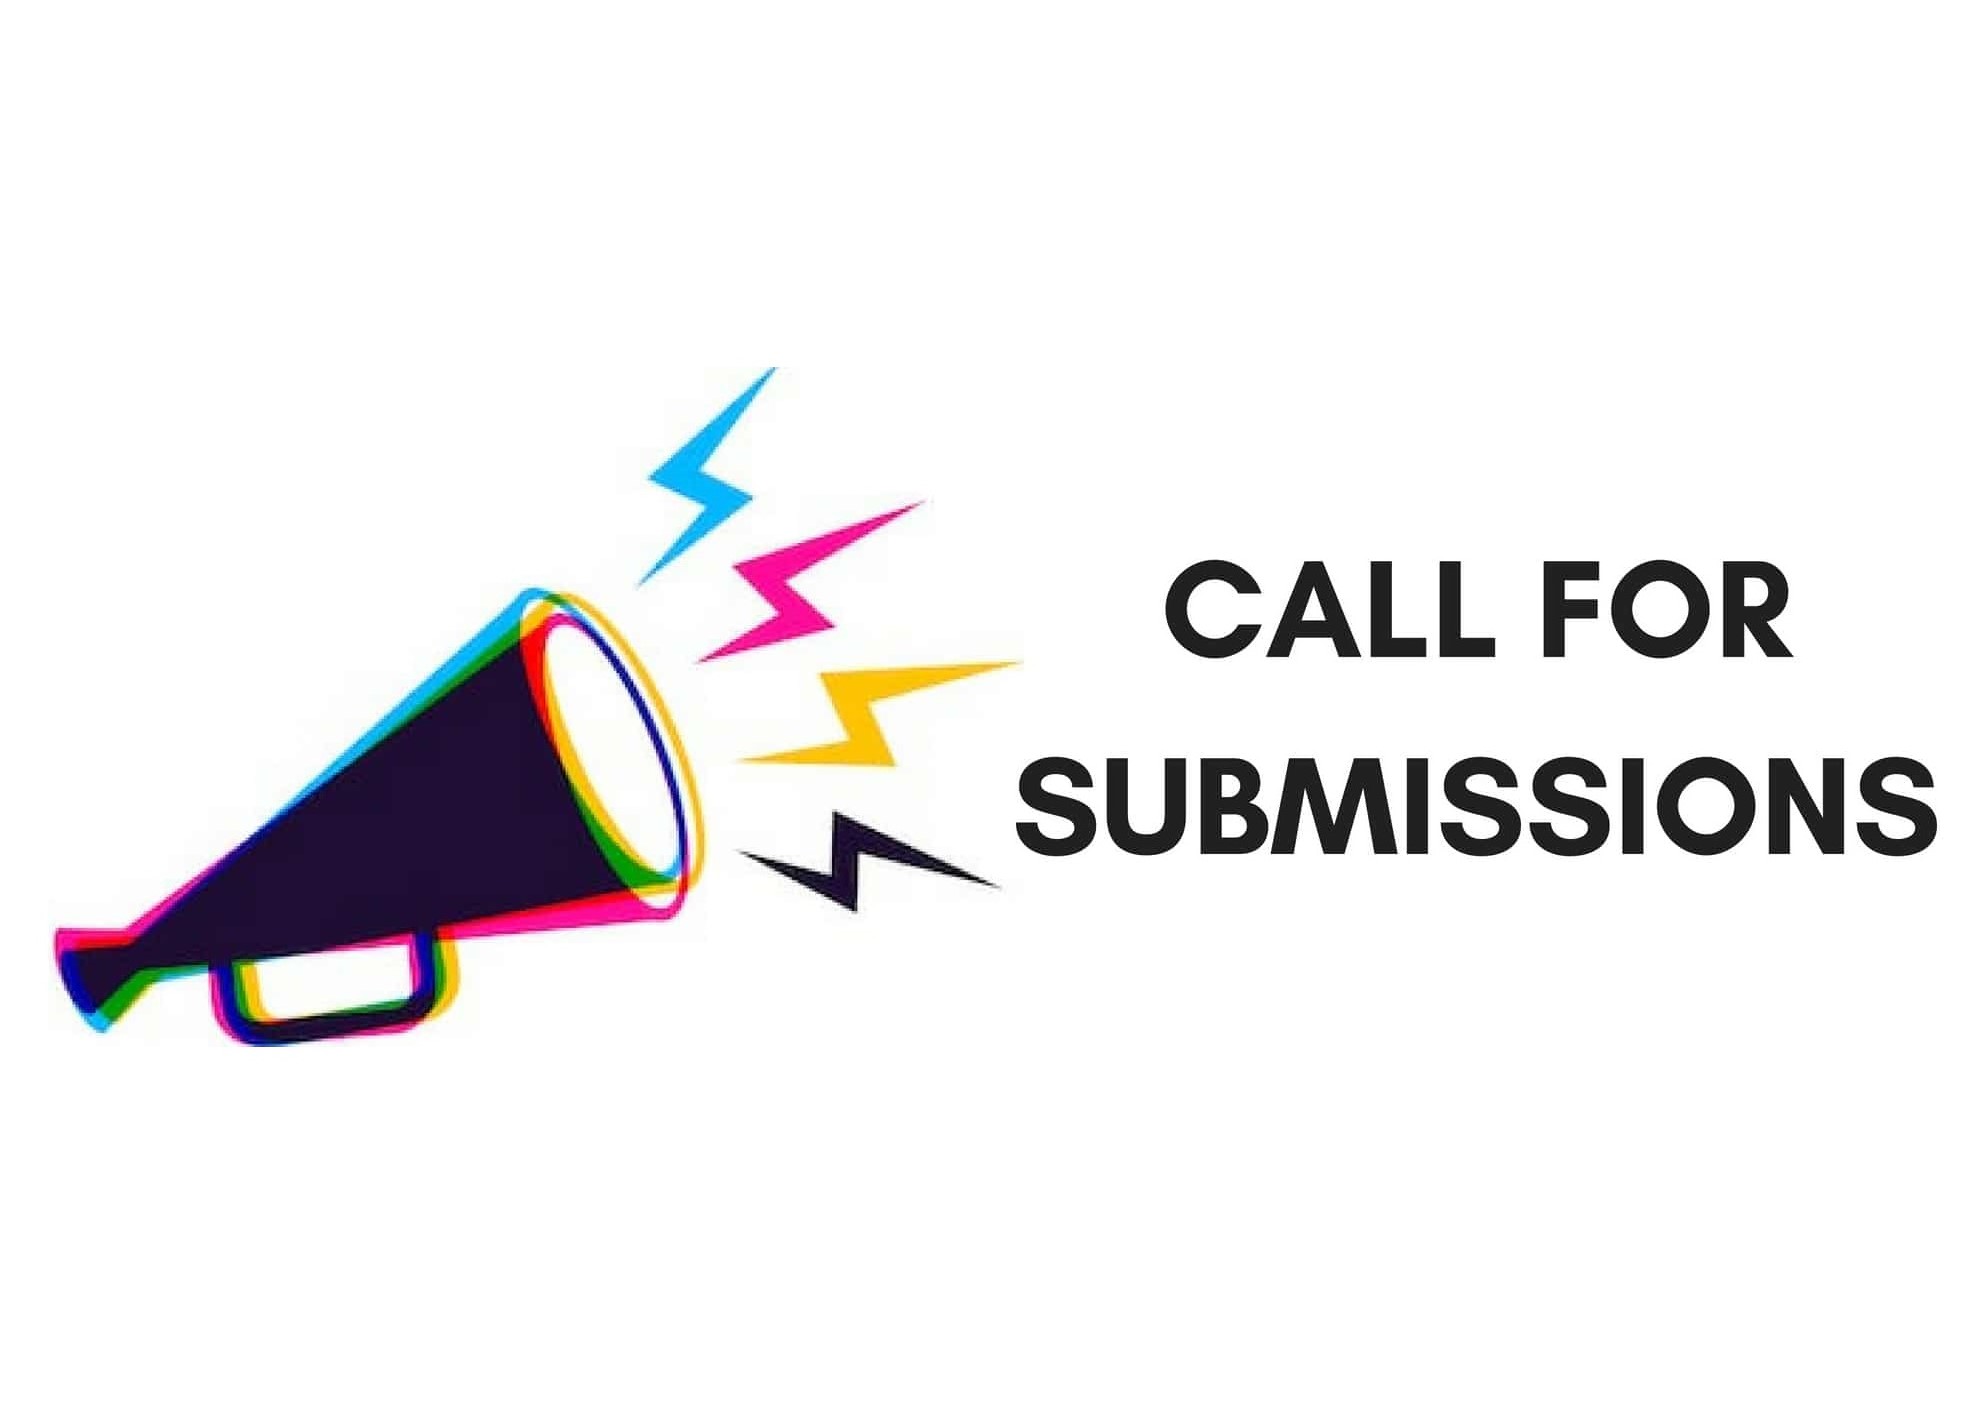 A Call for Expression of Interest to Participate in the ASA Project 2022/2023